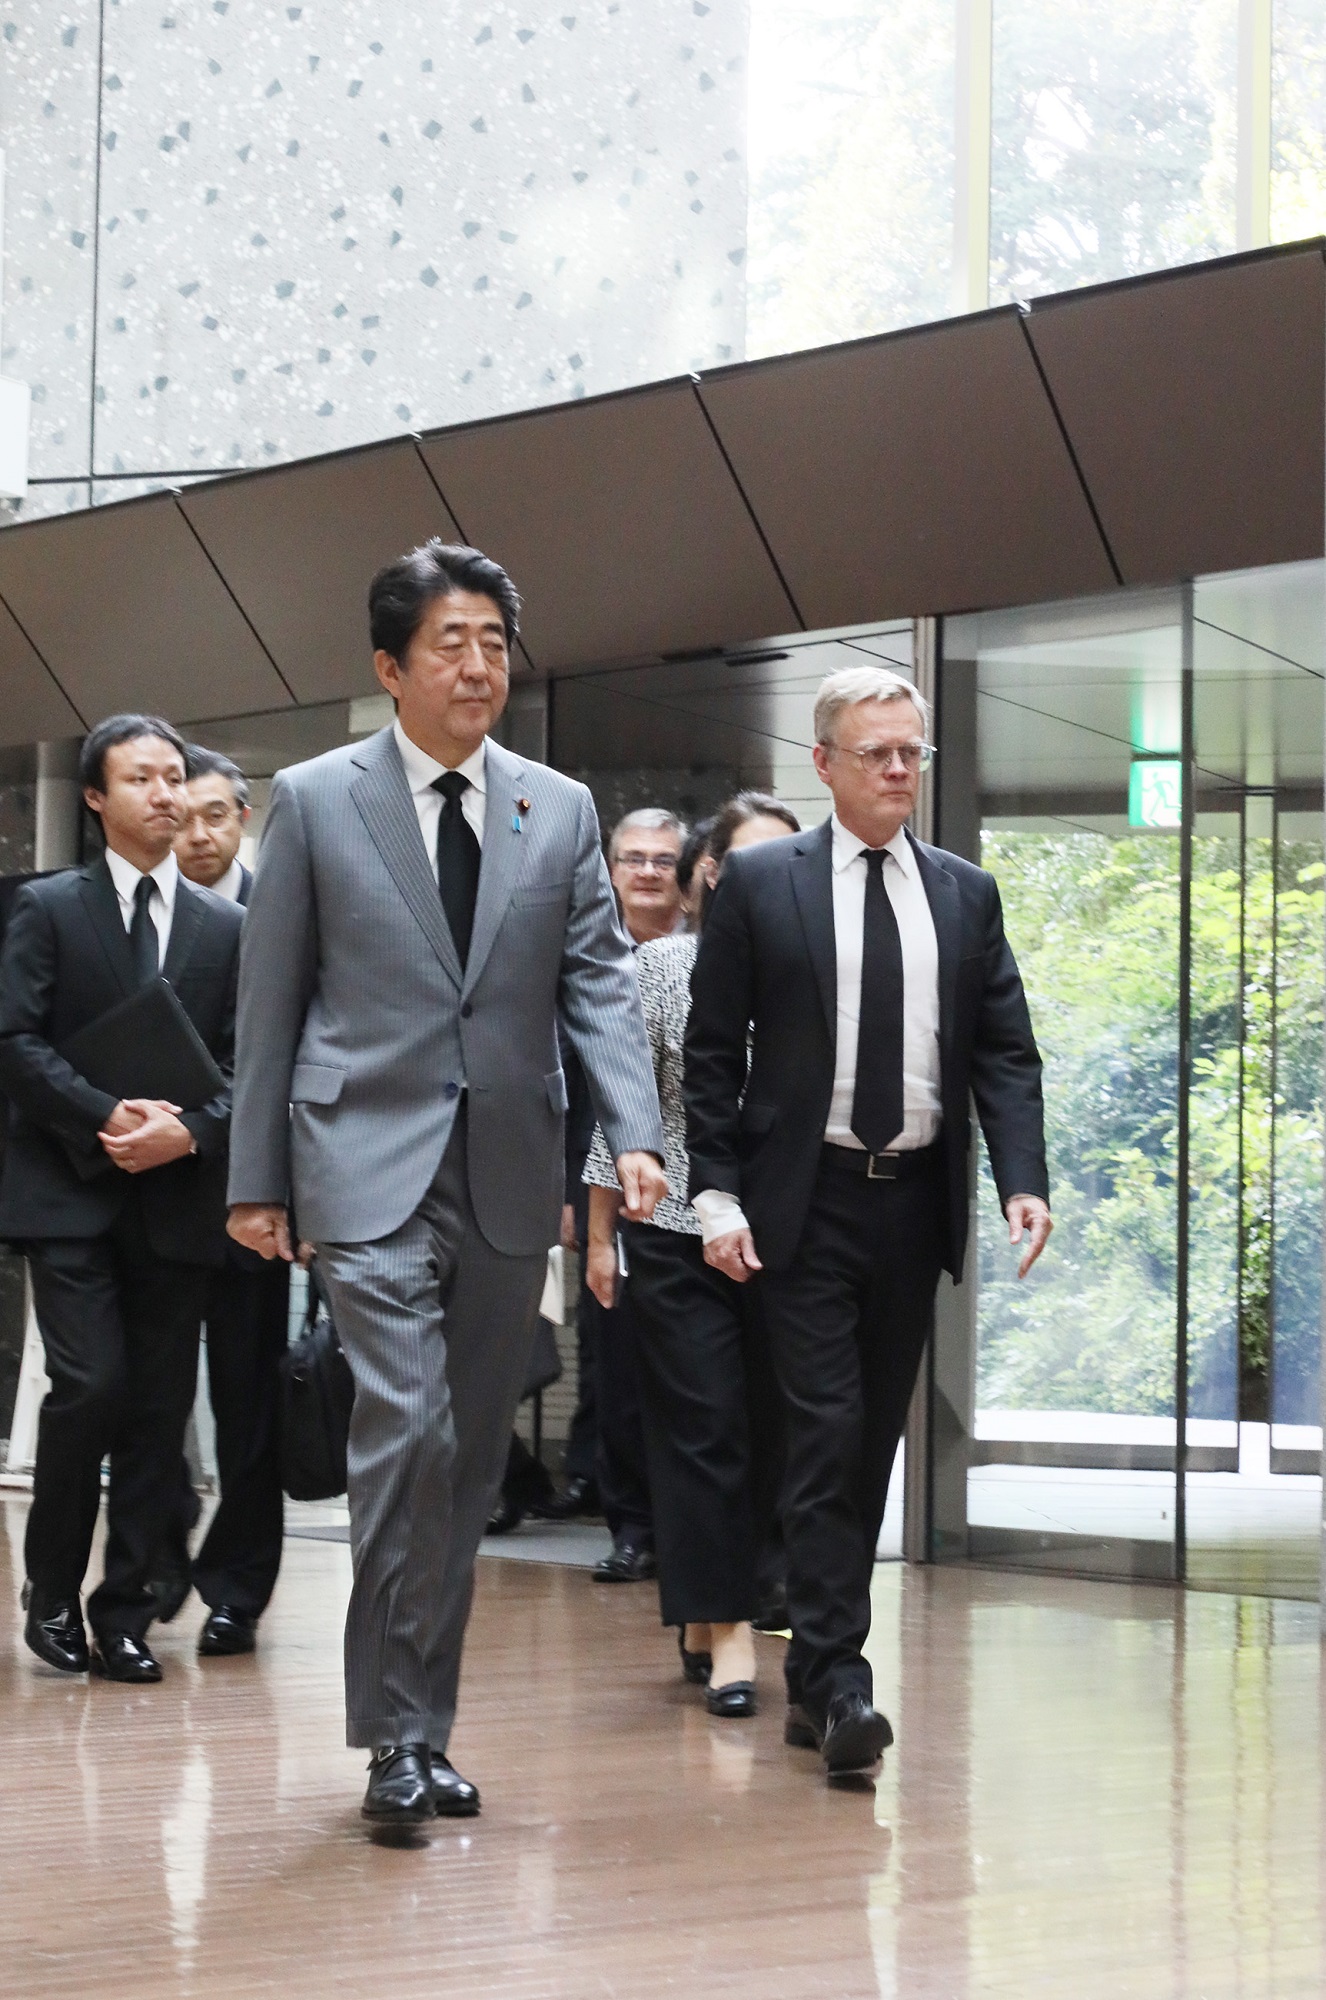 Photograph of the Prime Minister arriving to offer his condolences (1)